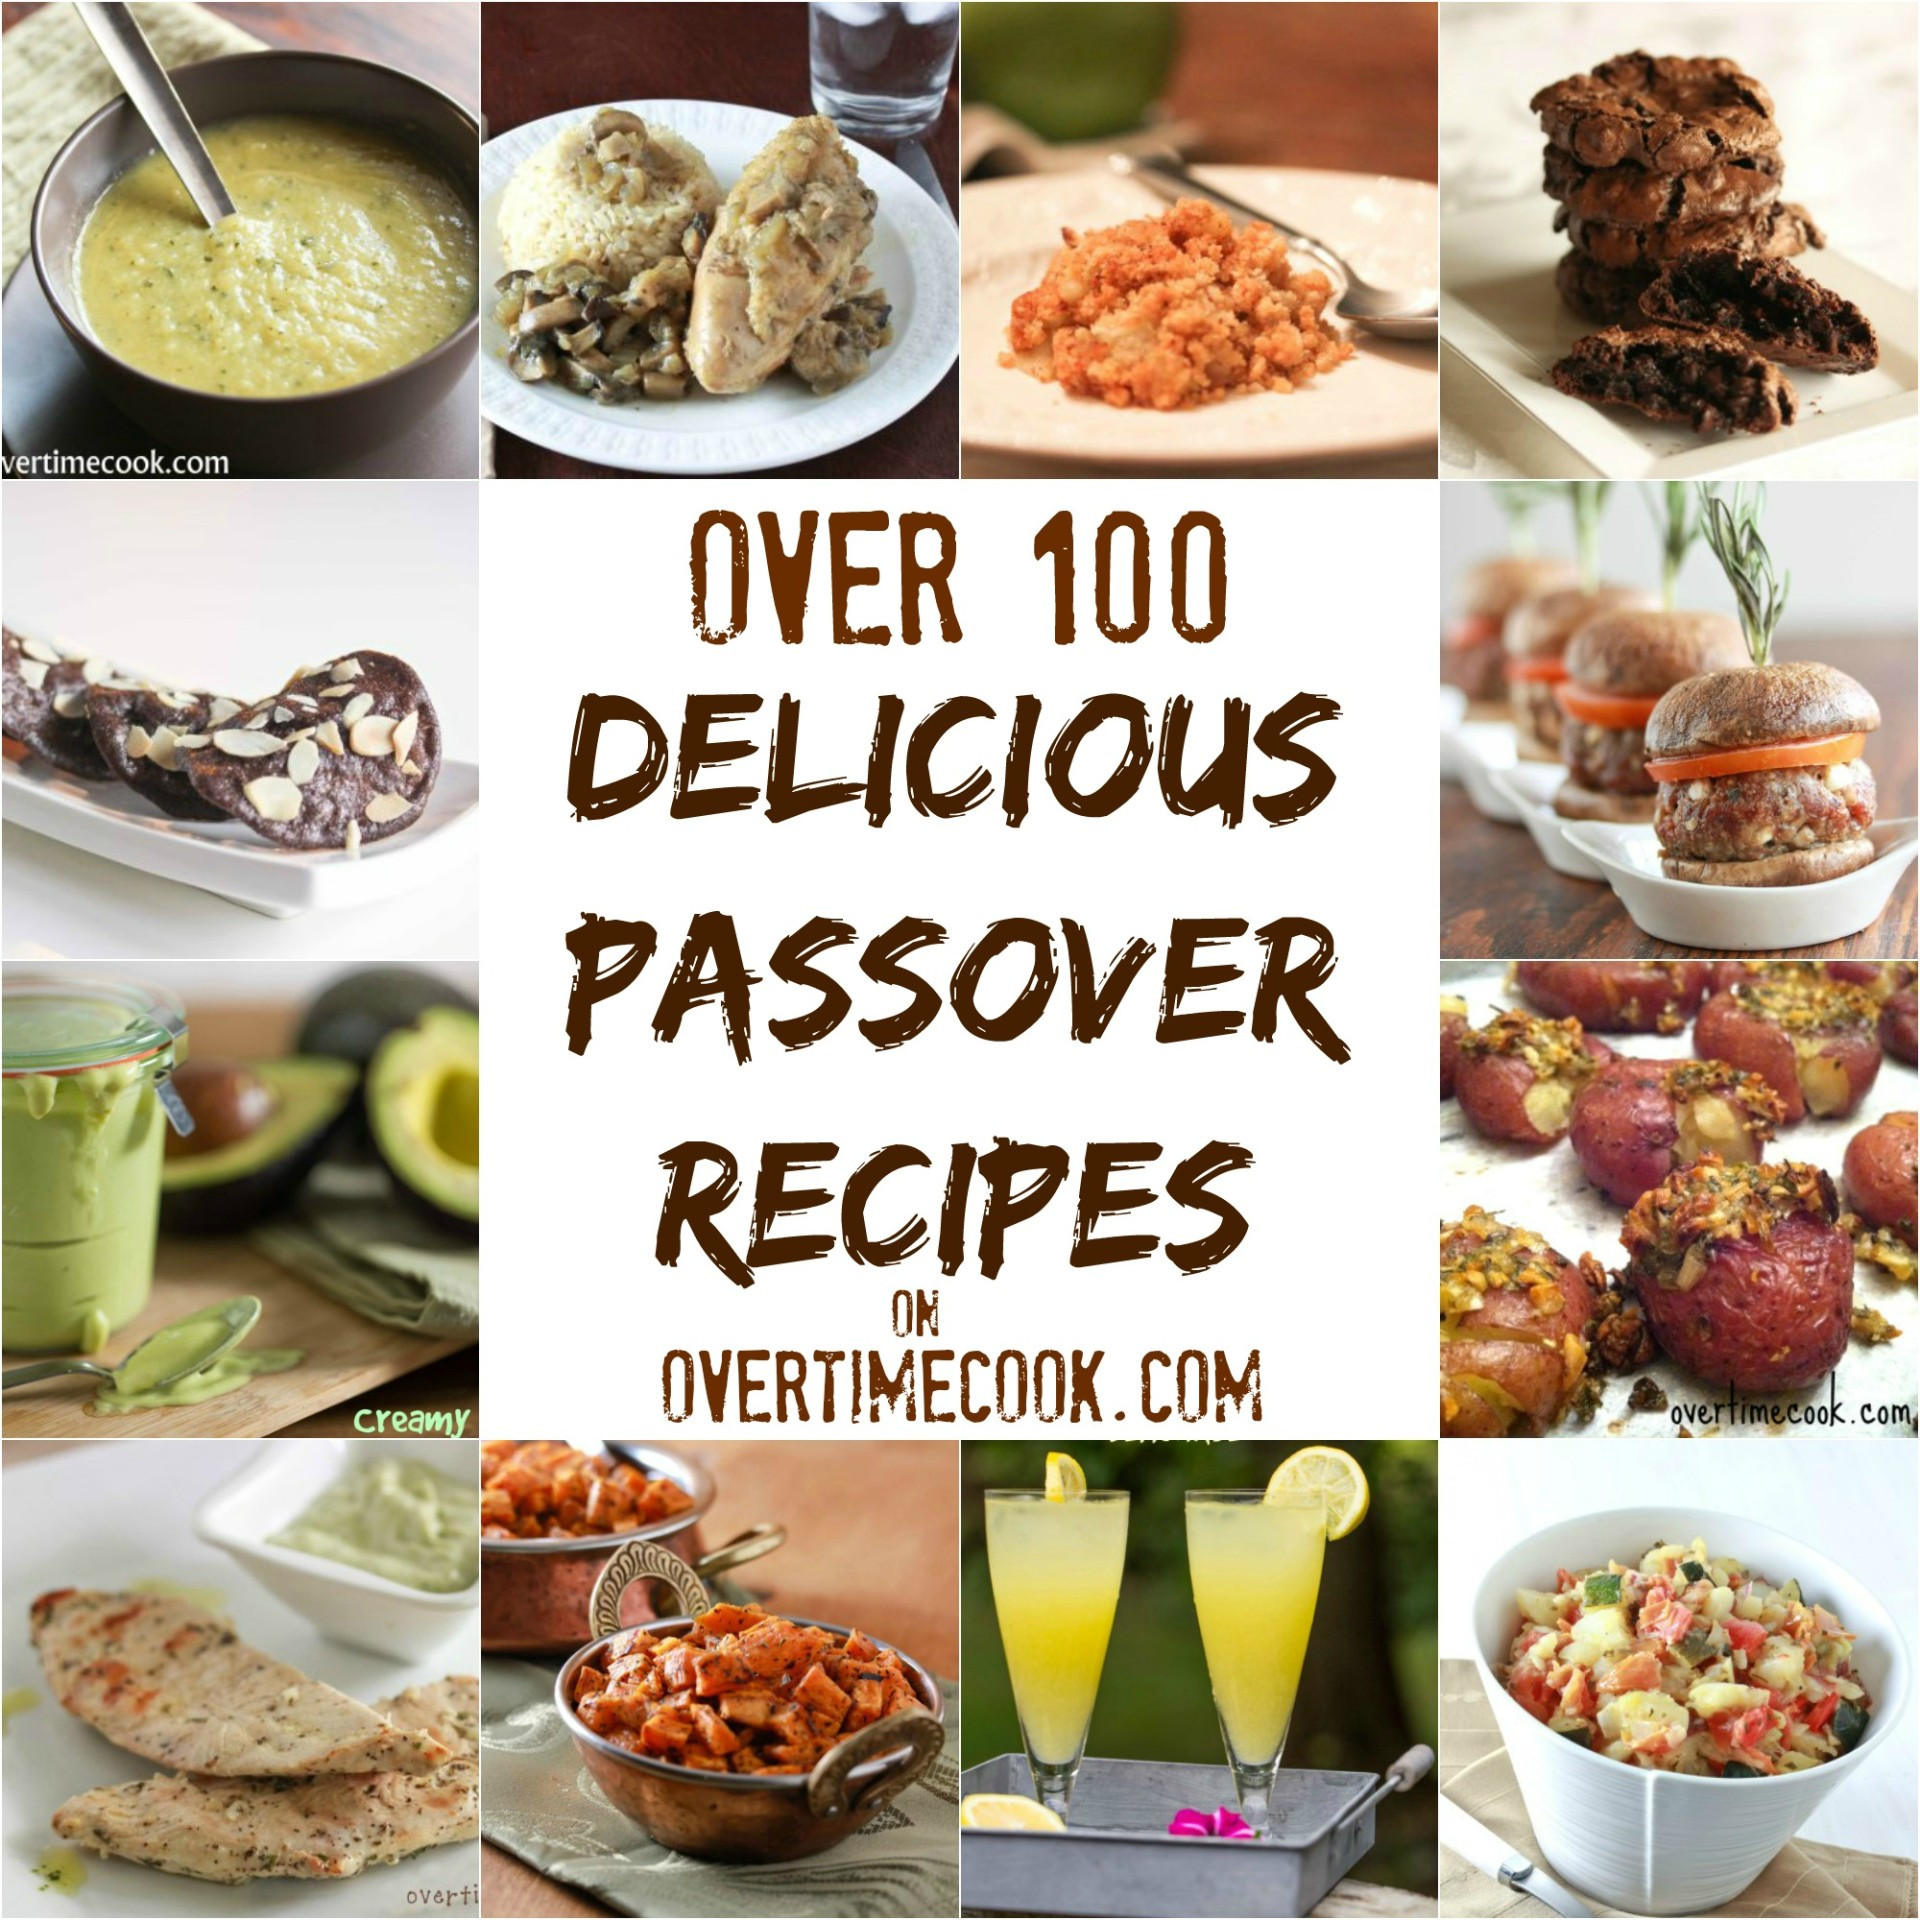 Kosher For Passover Food
 Over 100 Delicious Passover Recipes Overtime Cook